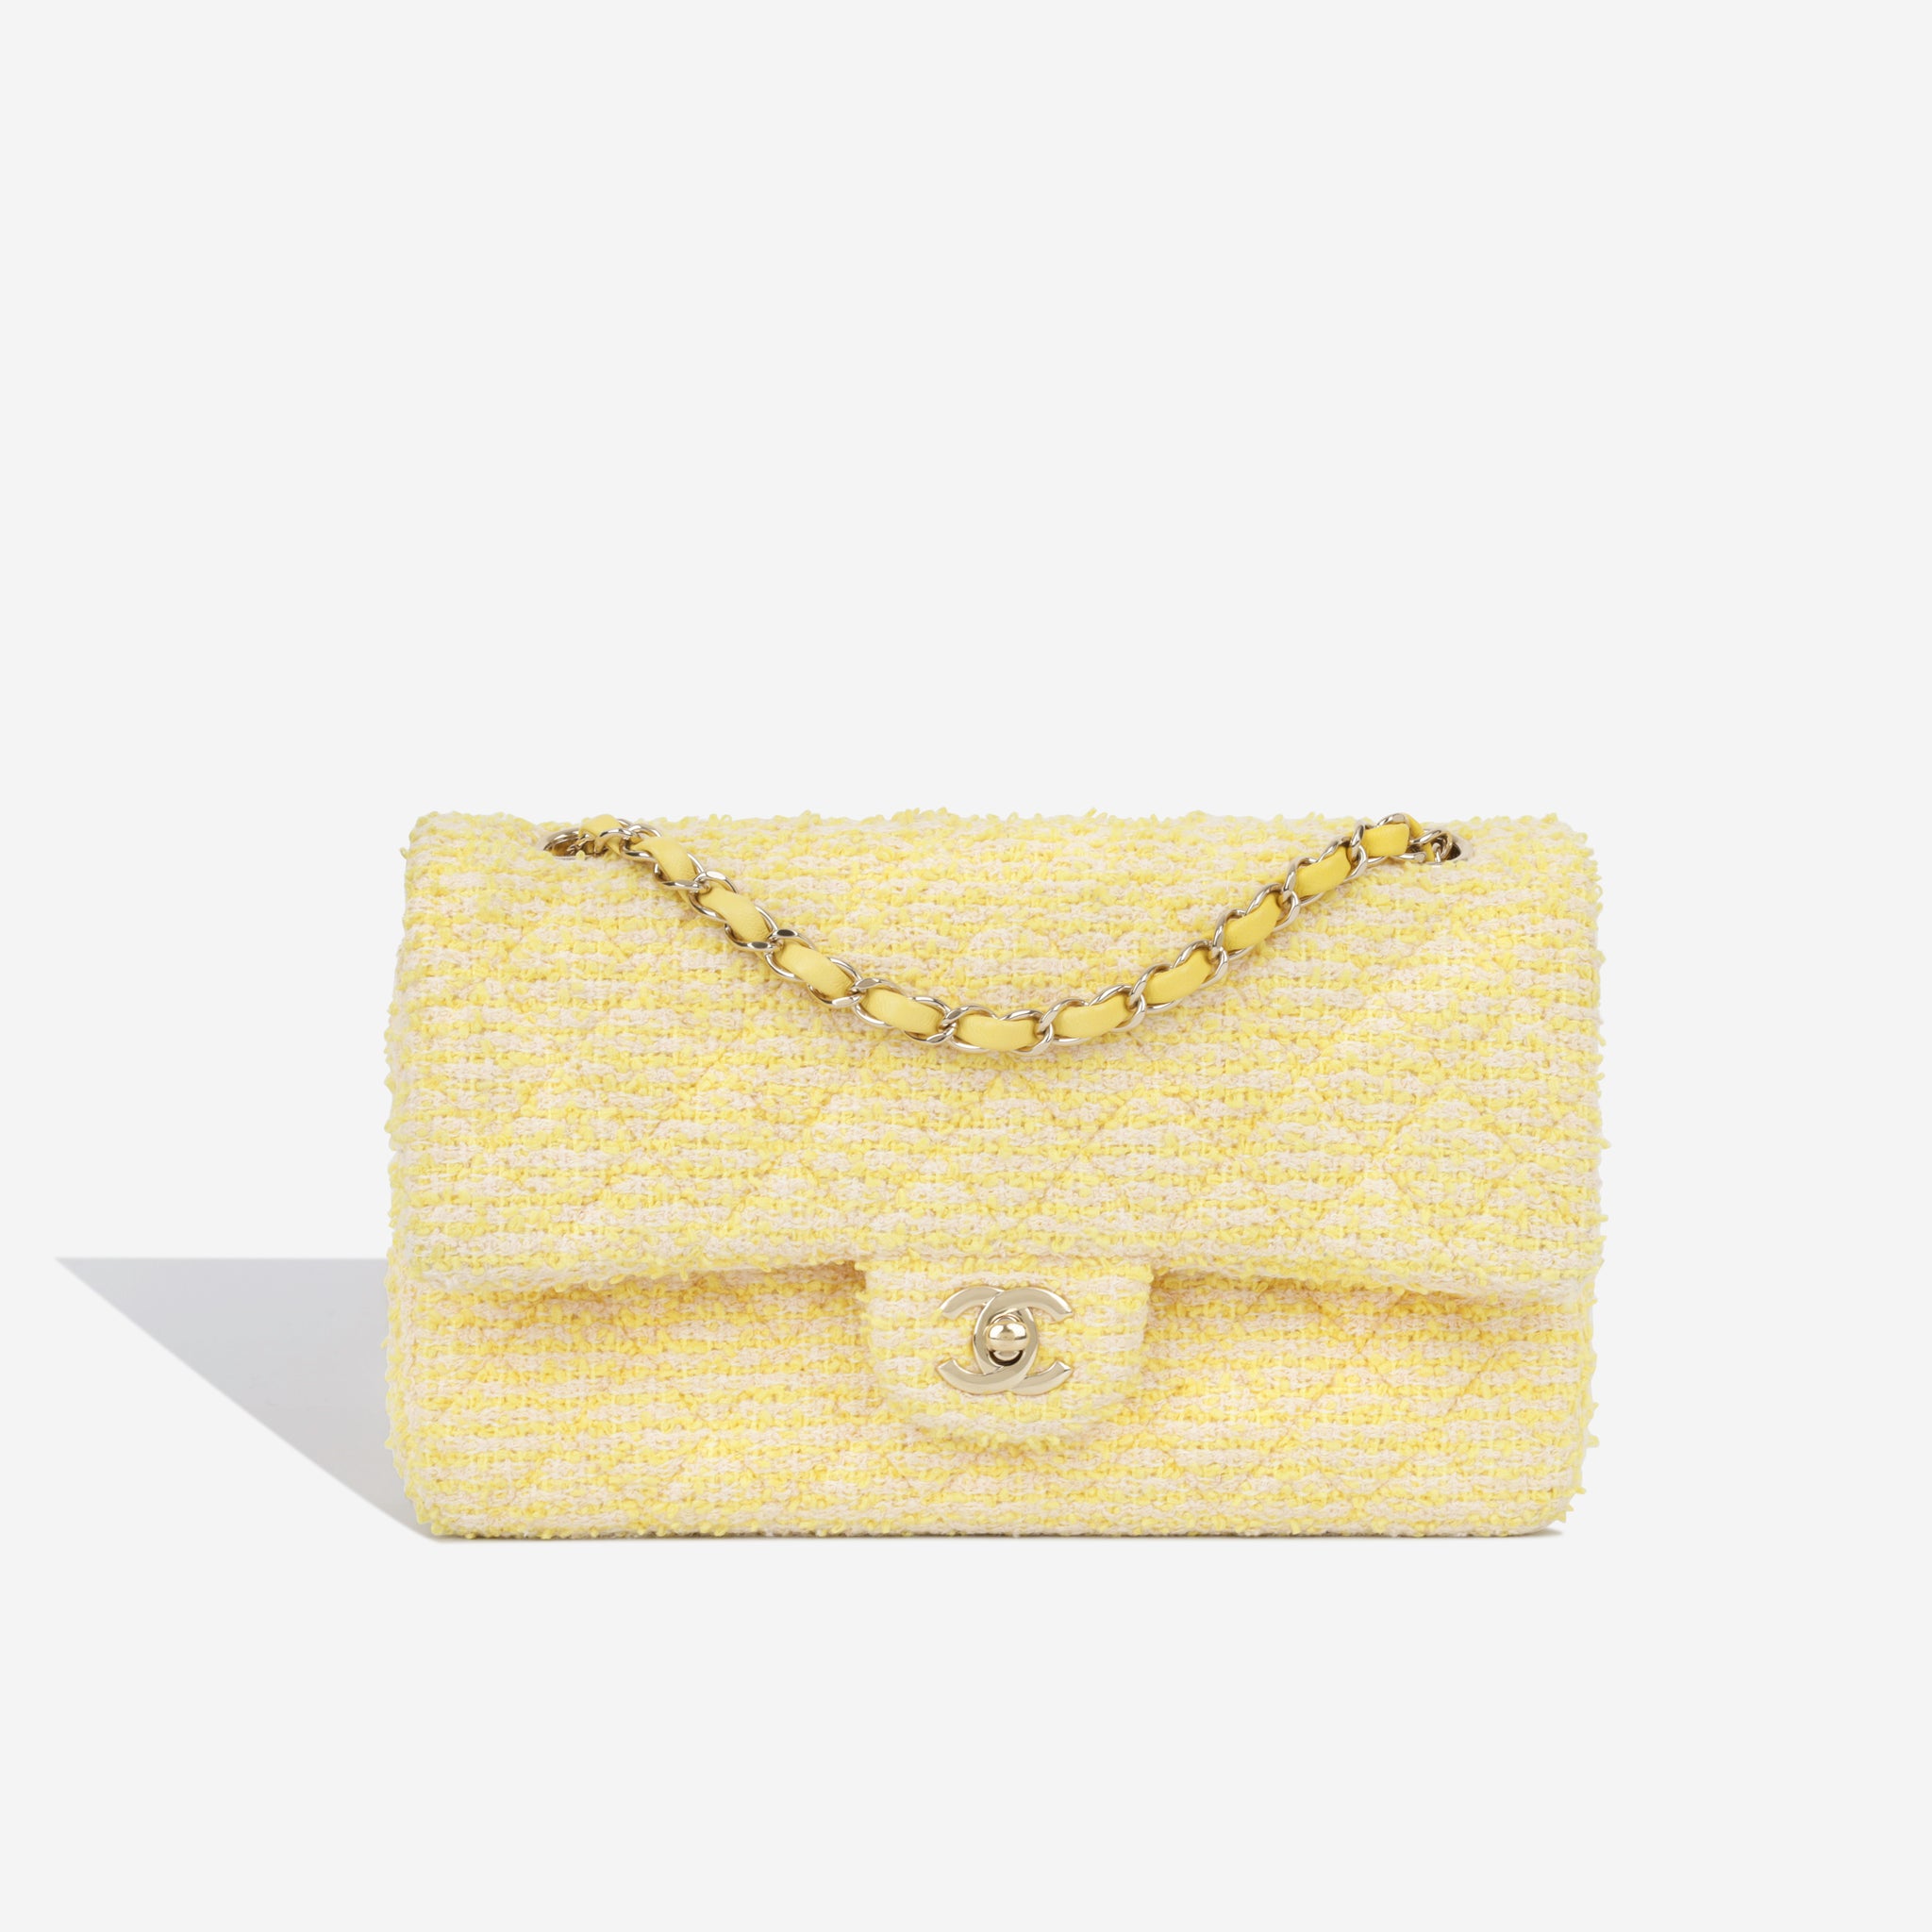 Chanel - Classic Flap Bag - Medium - Yellow Tweed - CGHW - Pre Loved